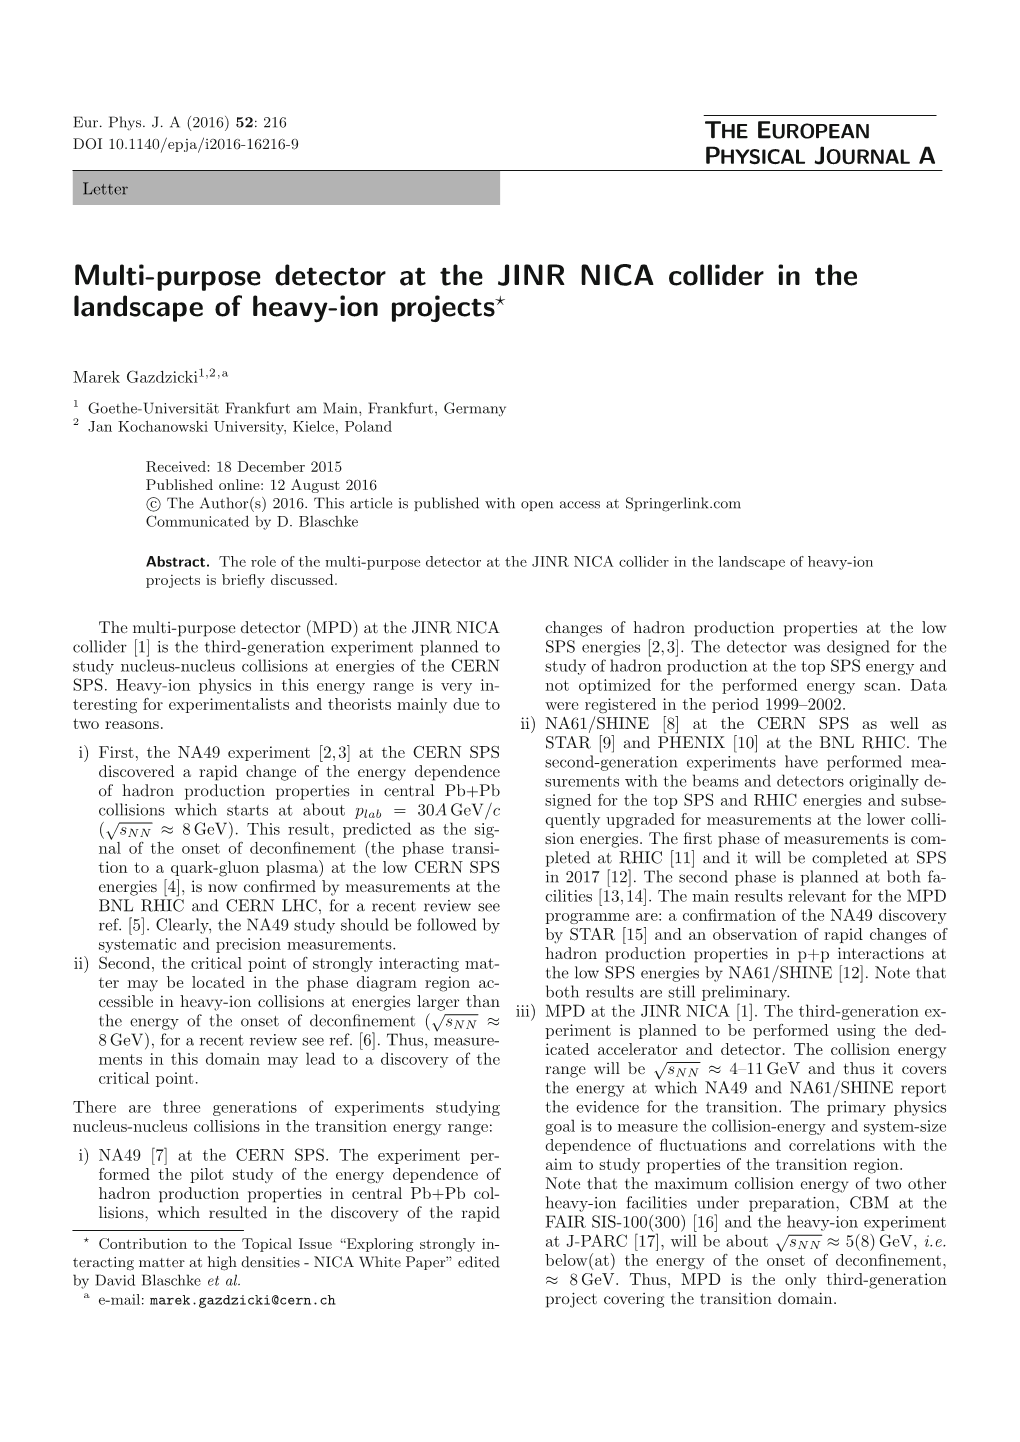 Multi-Purpose Detector at the JINR NICA Collider in the Landscape of Heavy-Ion Projects